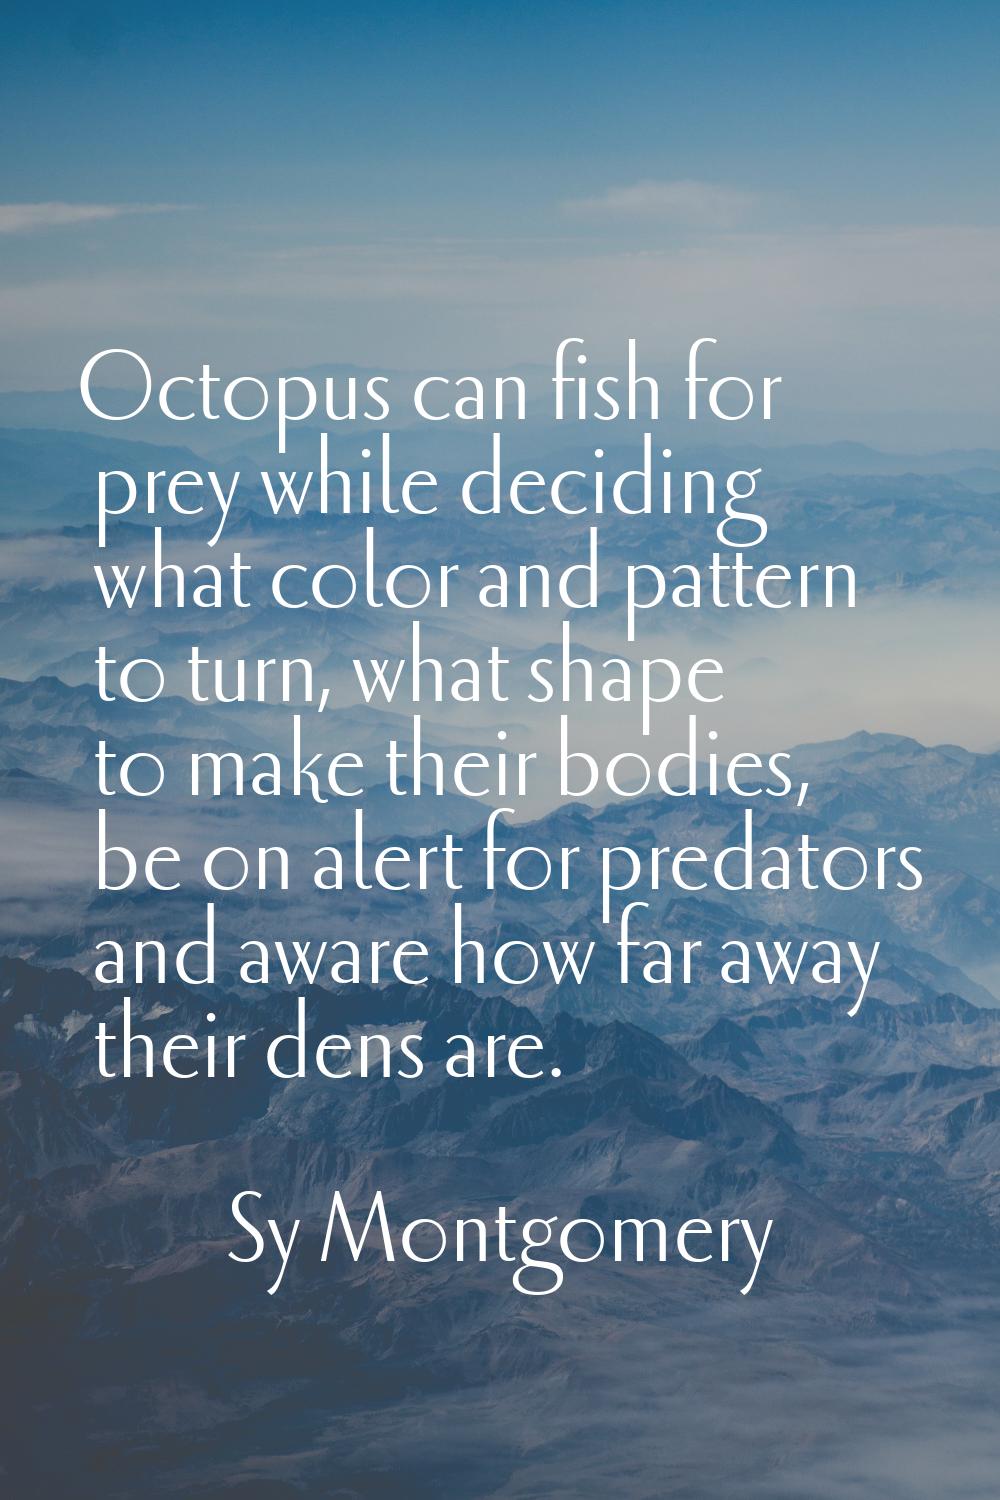 Octopus can fish for prey while deciding what color and pattern to turn, what shape to make their b